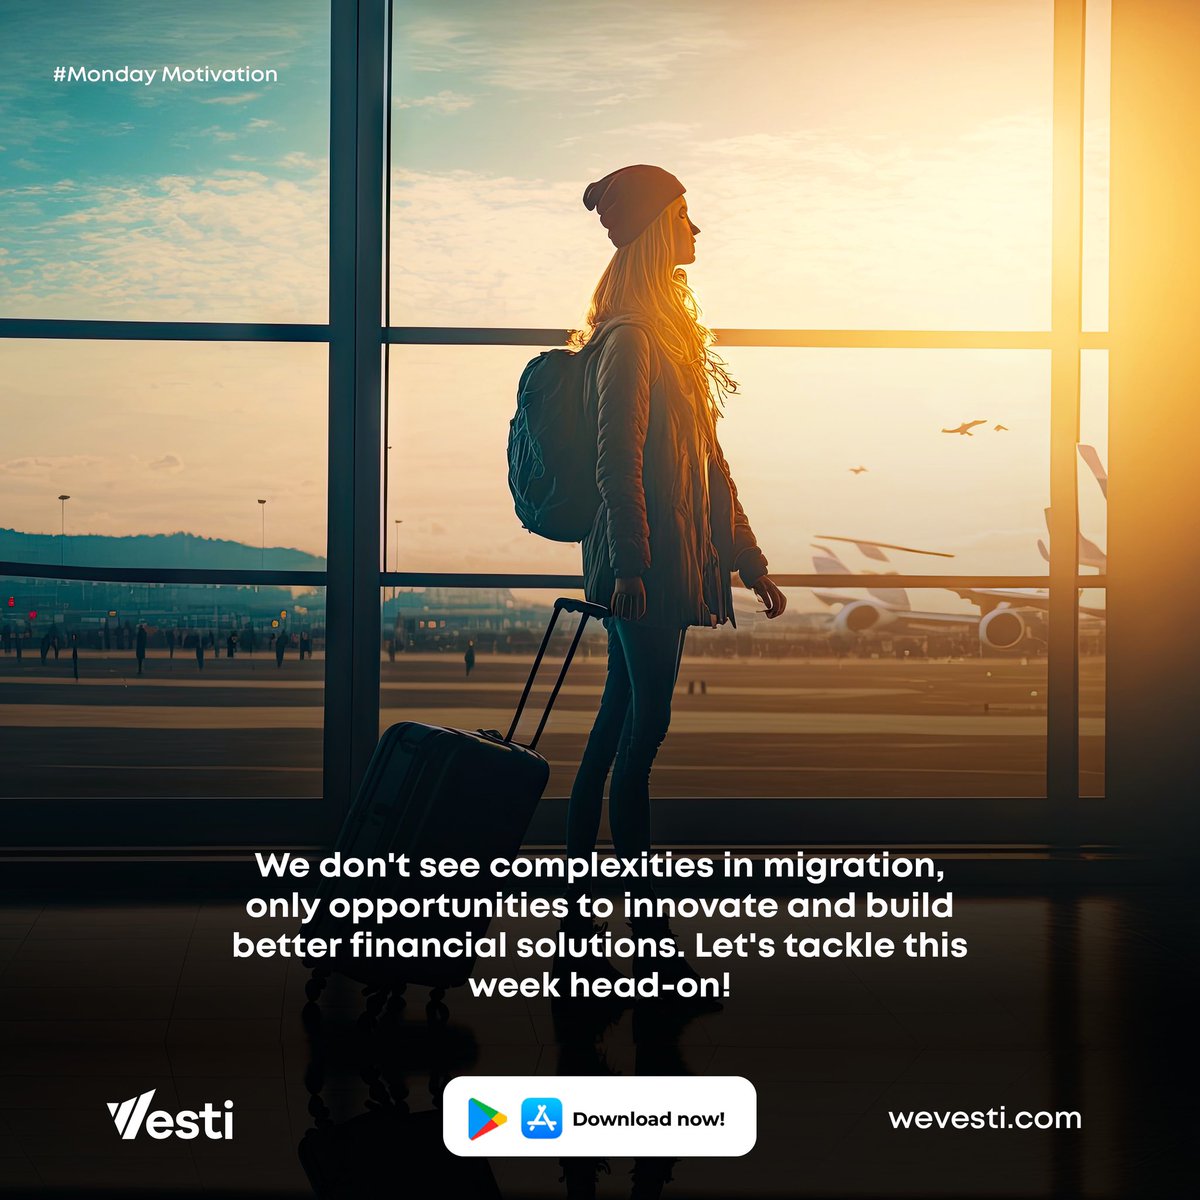 New week, new hustle! Migration journeys can be complex, but at Vesti, we see them as chances to innovate and build better financial tools. This week, let’s tackle challenges head-on and empower immigrants around the world! #MondayMotivation #MigrationMadeEasier #Vesti